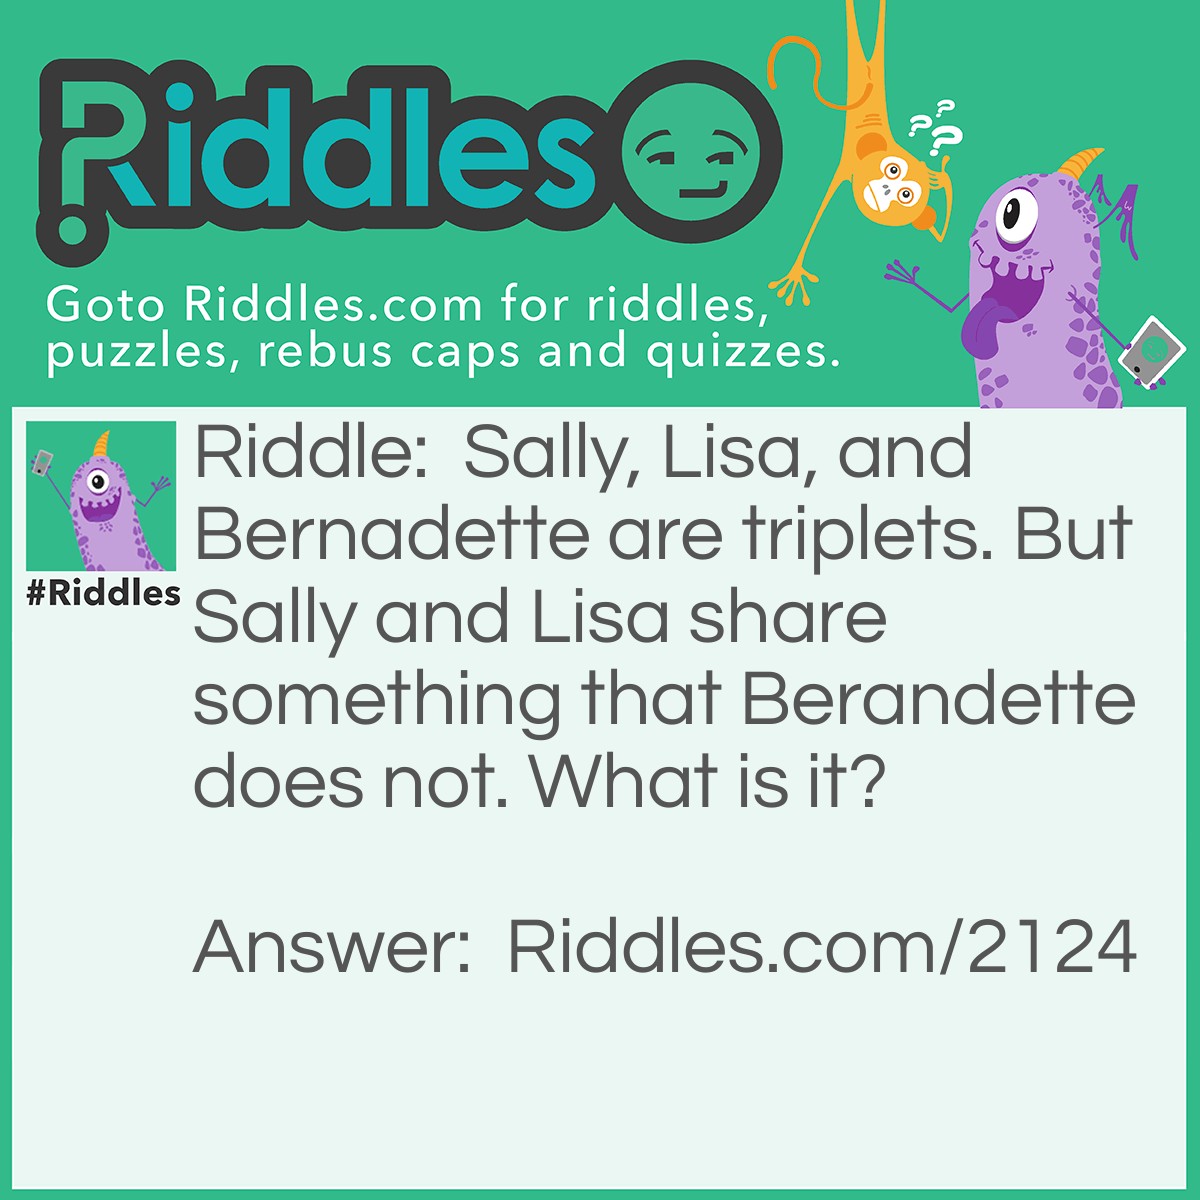 Riddle: Sally, Lisa, and Bernadette are triplets. But Sally and Lisa share something that Berandette does not. What is it? Answer: The letter 'L' in their names.